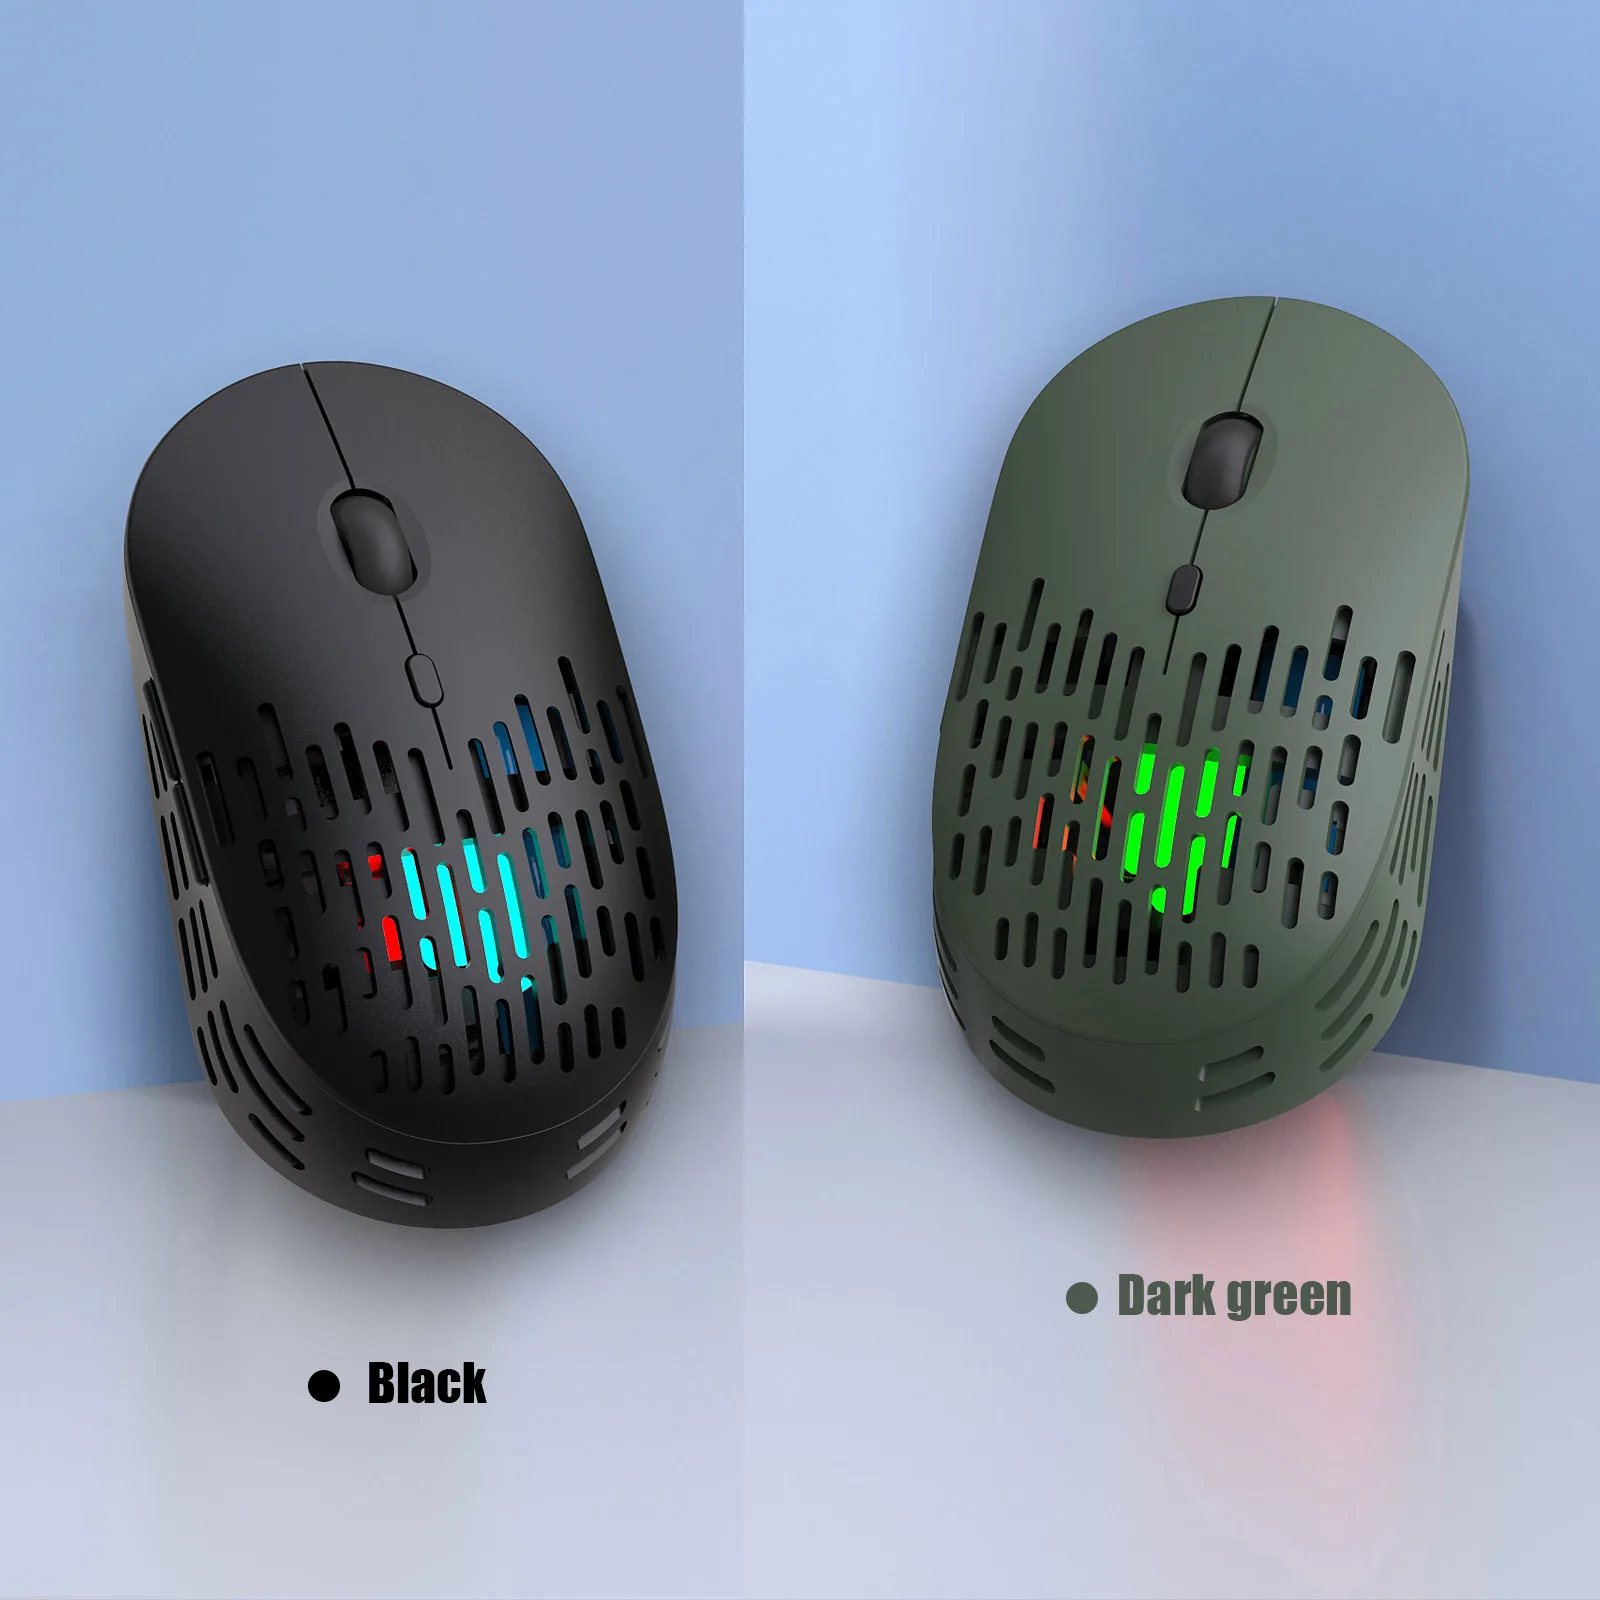 Office Notebook Mice Mouse Pro Gamer 2.4G Wireless Mouse Mice Hollow Out Design 800-1200-1600 DPI Optical Mice for PC digital mouse